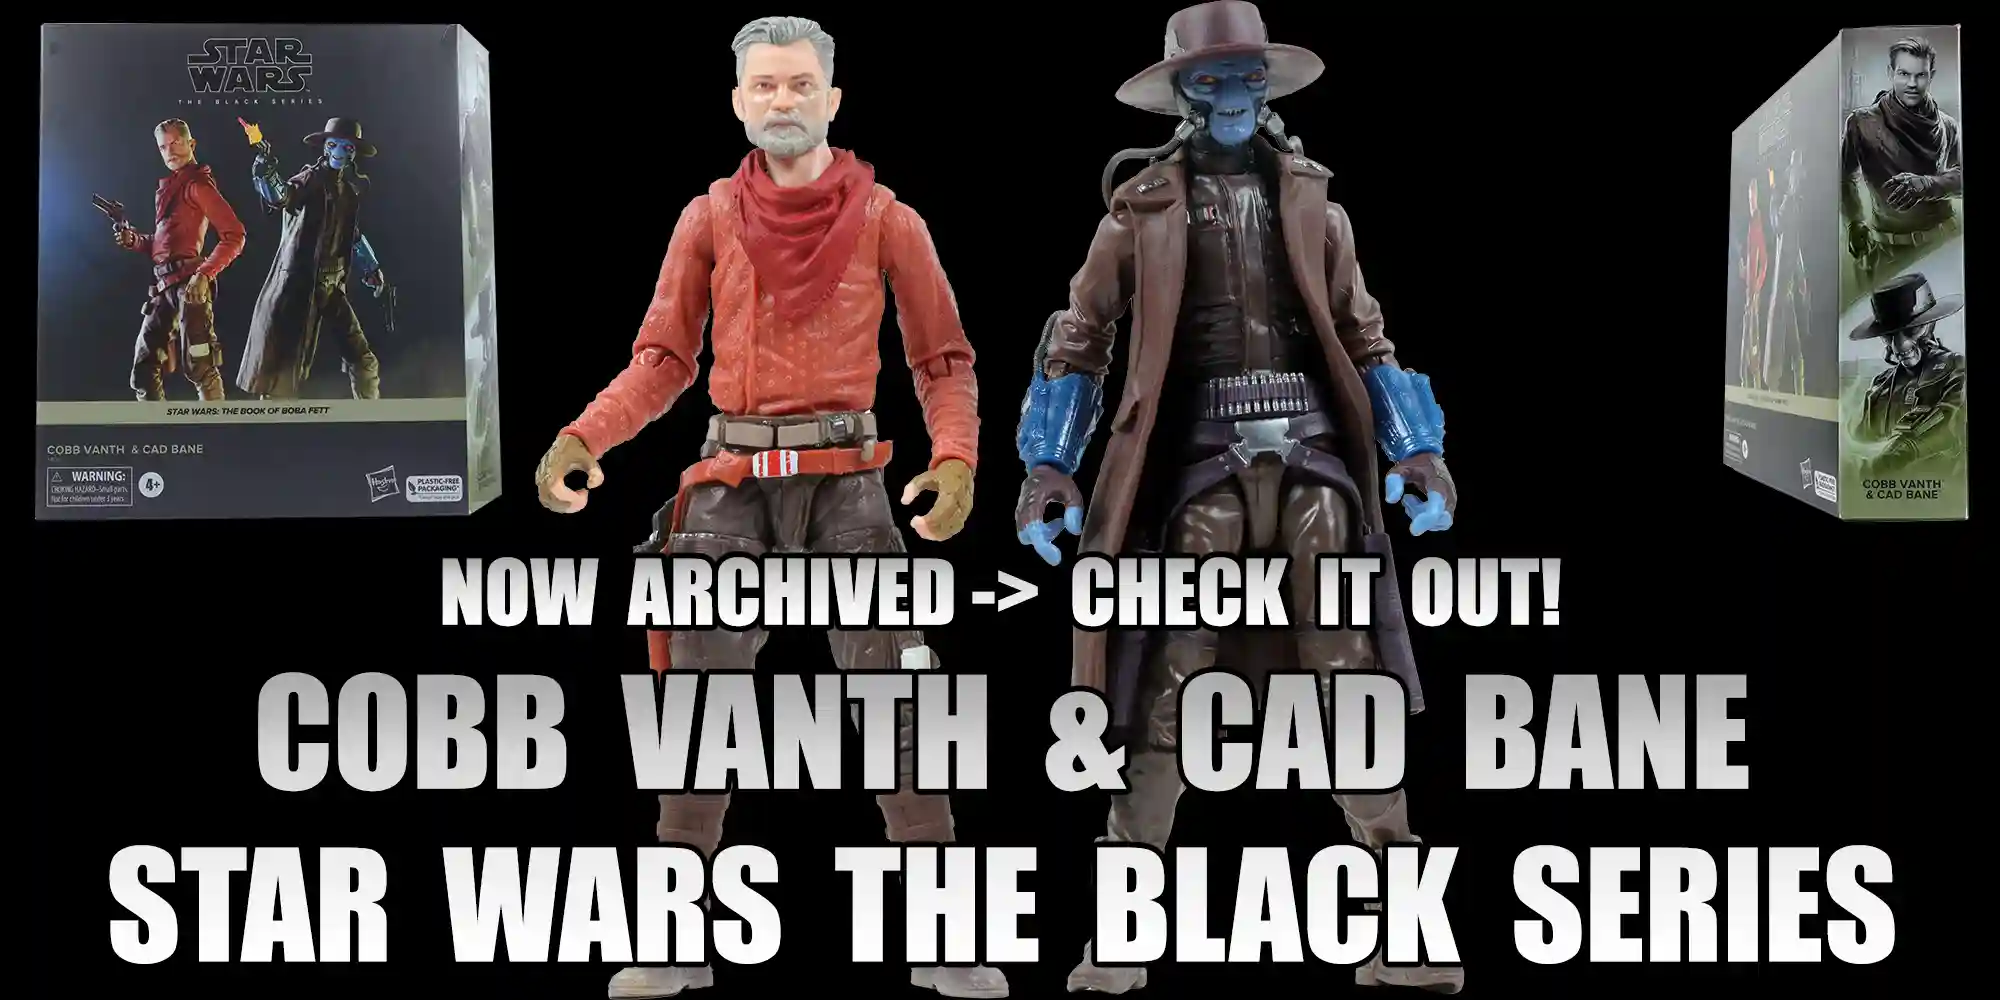 Black Series Cobb Vanth & Cad Bane Archived - Take A Look!